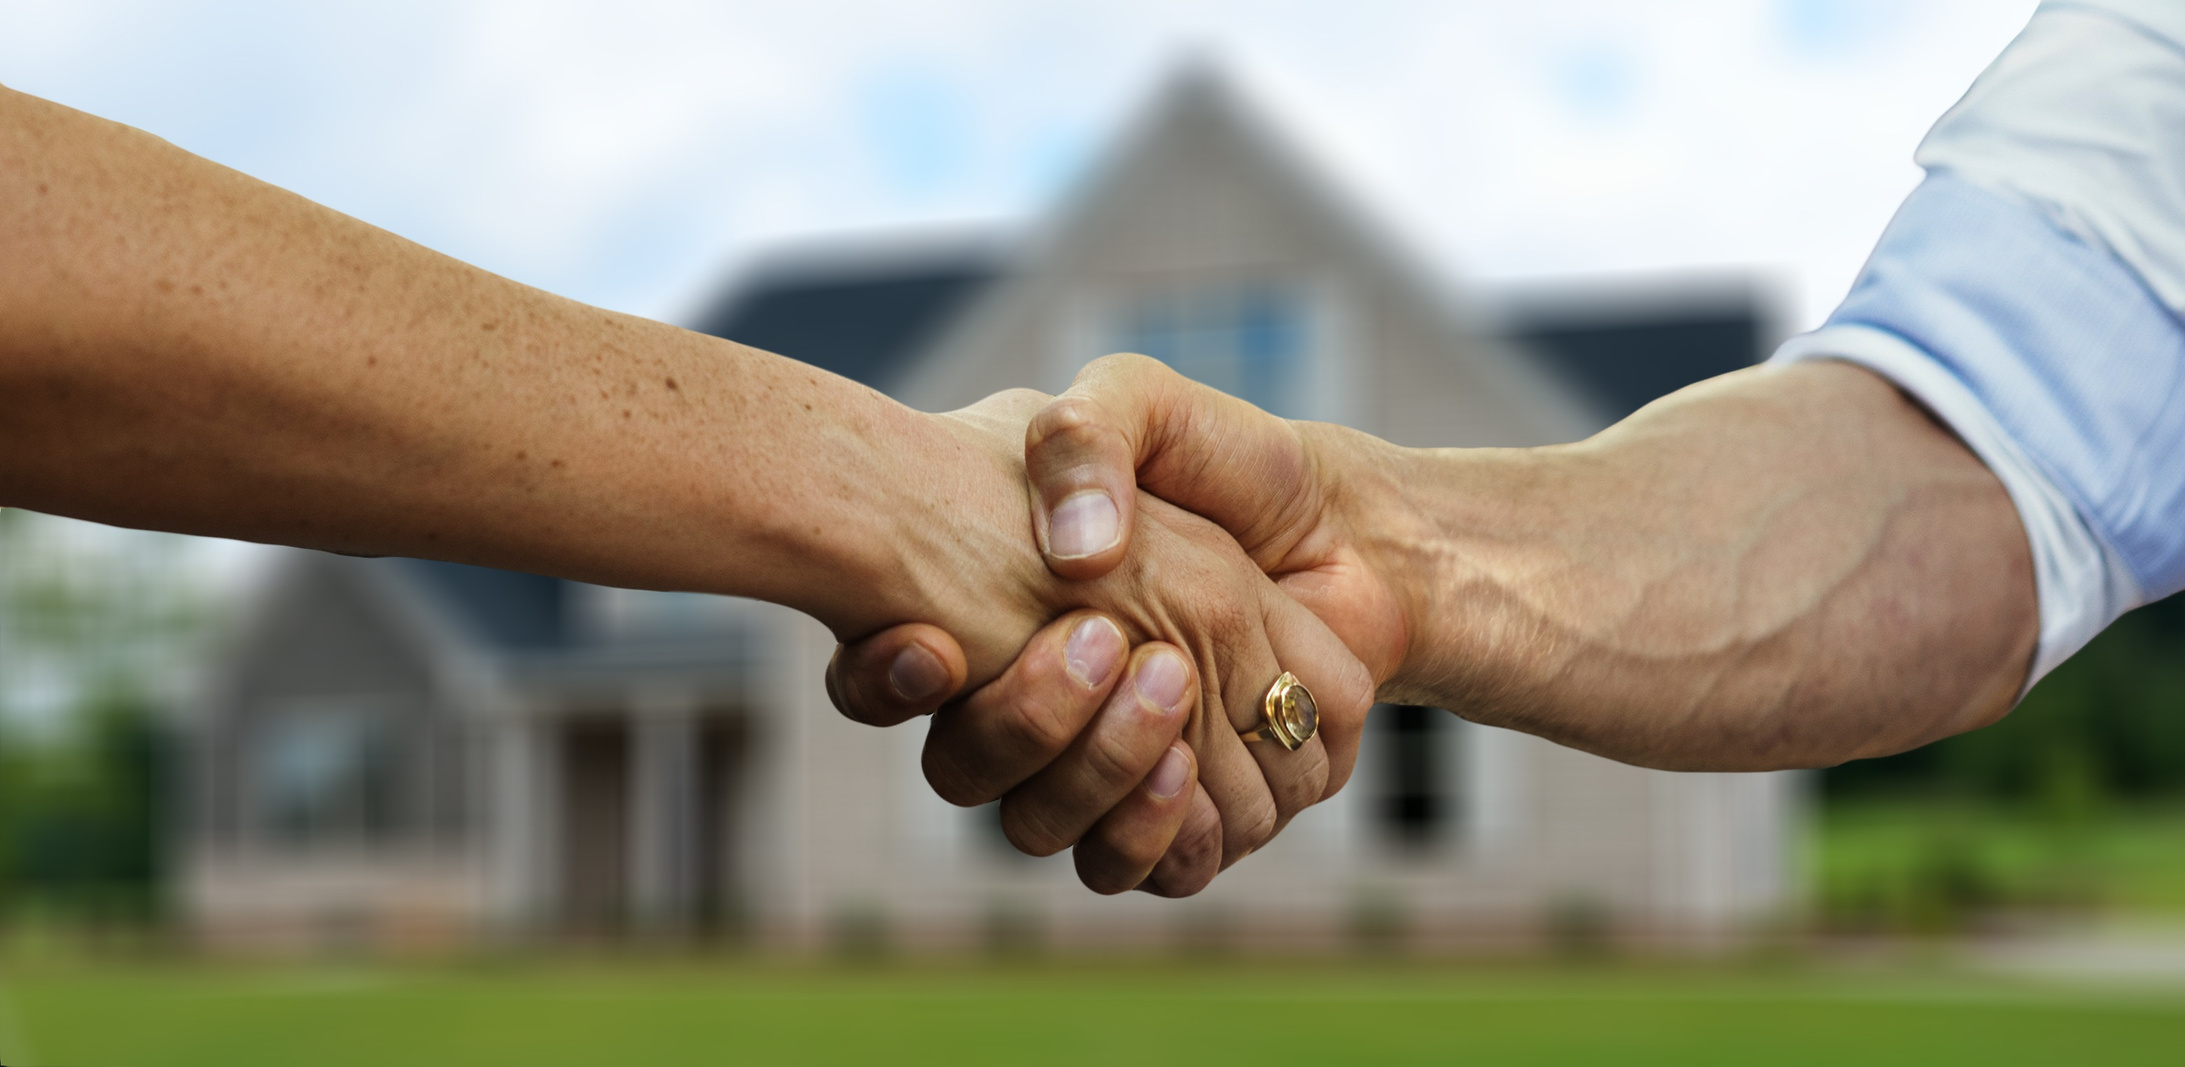 Shaking Hands After Selling a House